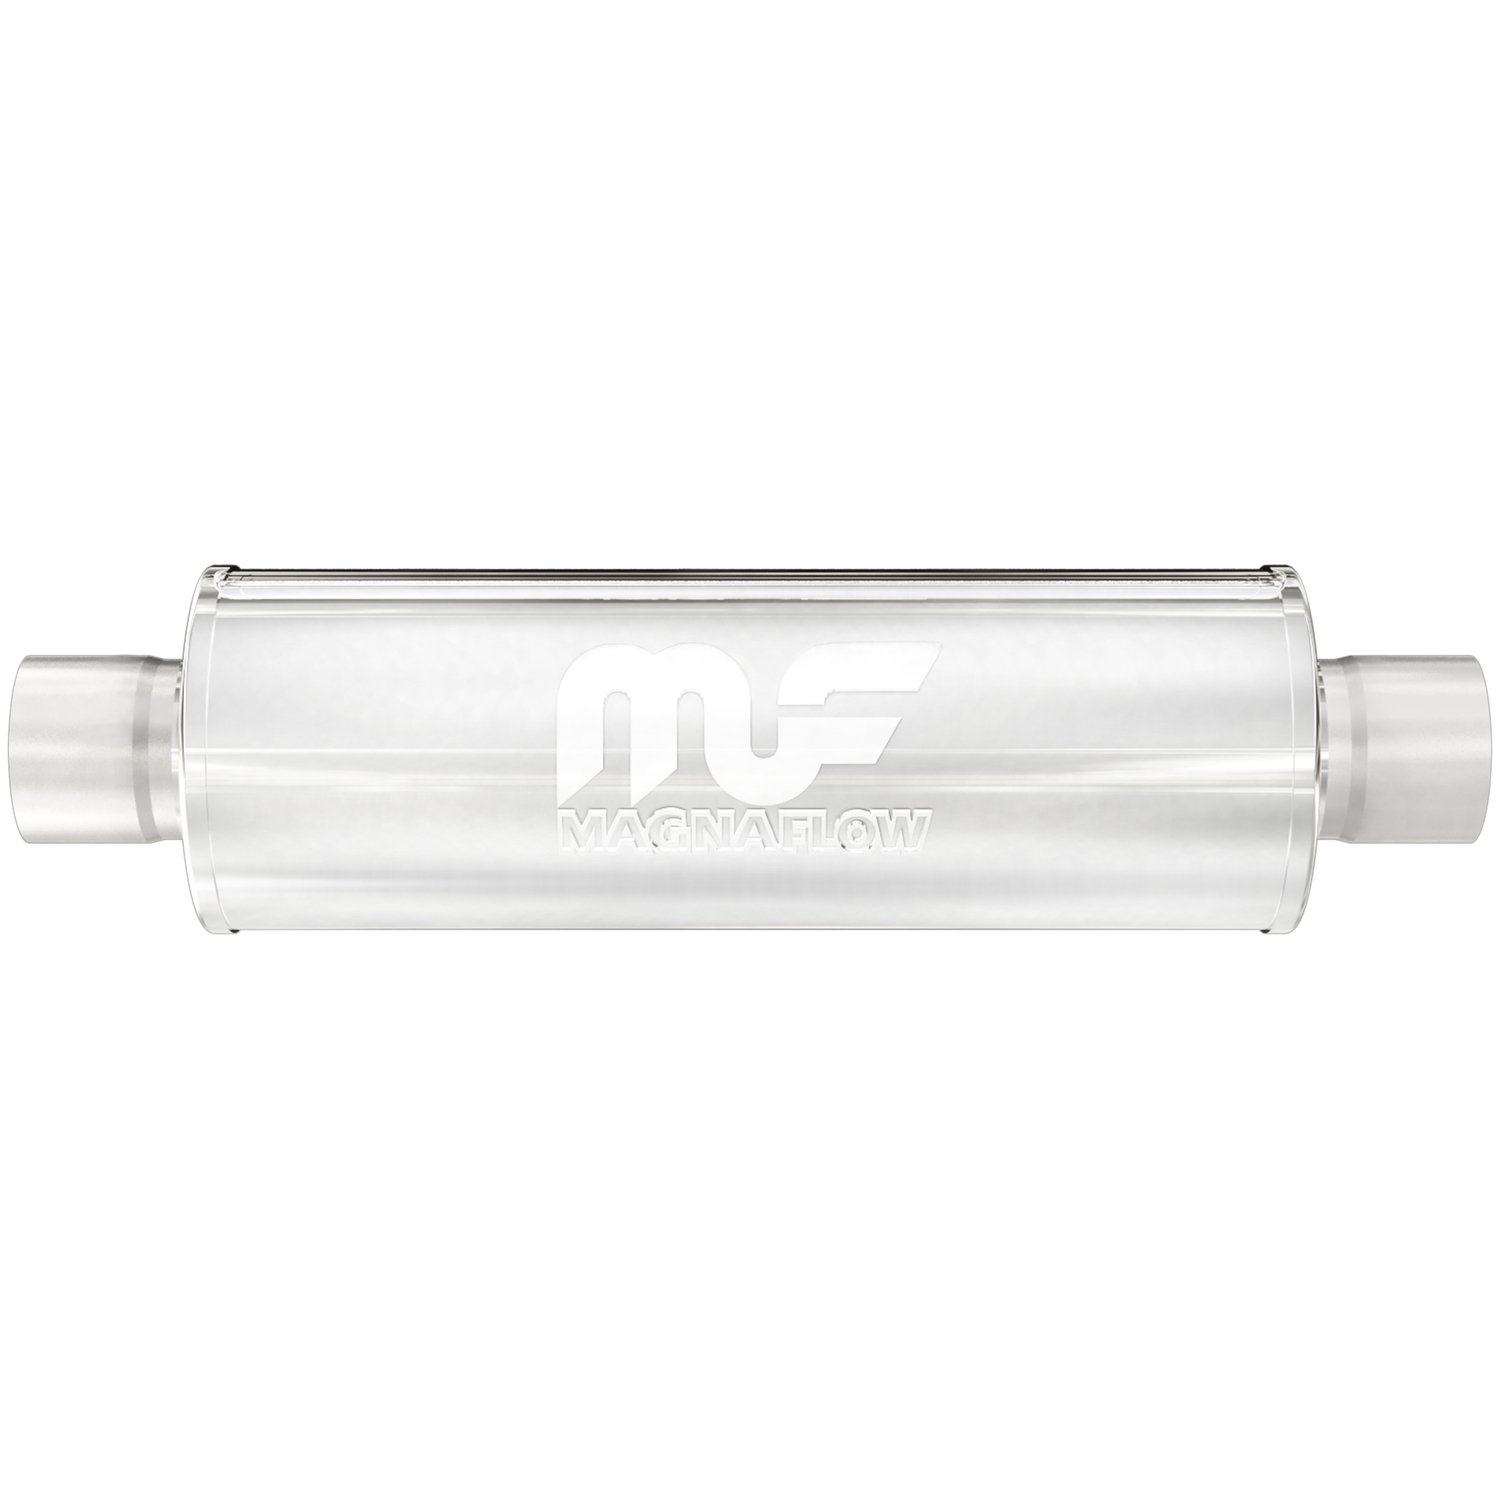 4" Round Muffler Center In/Center Out: 2" Body Length: 18" Overall Length: 24" Core Size: 2.5" Satin Finish